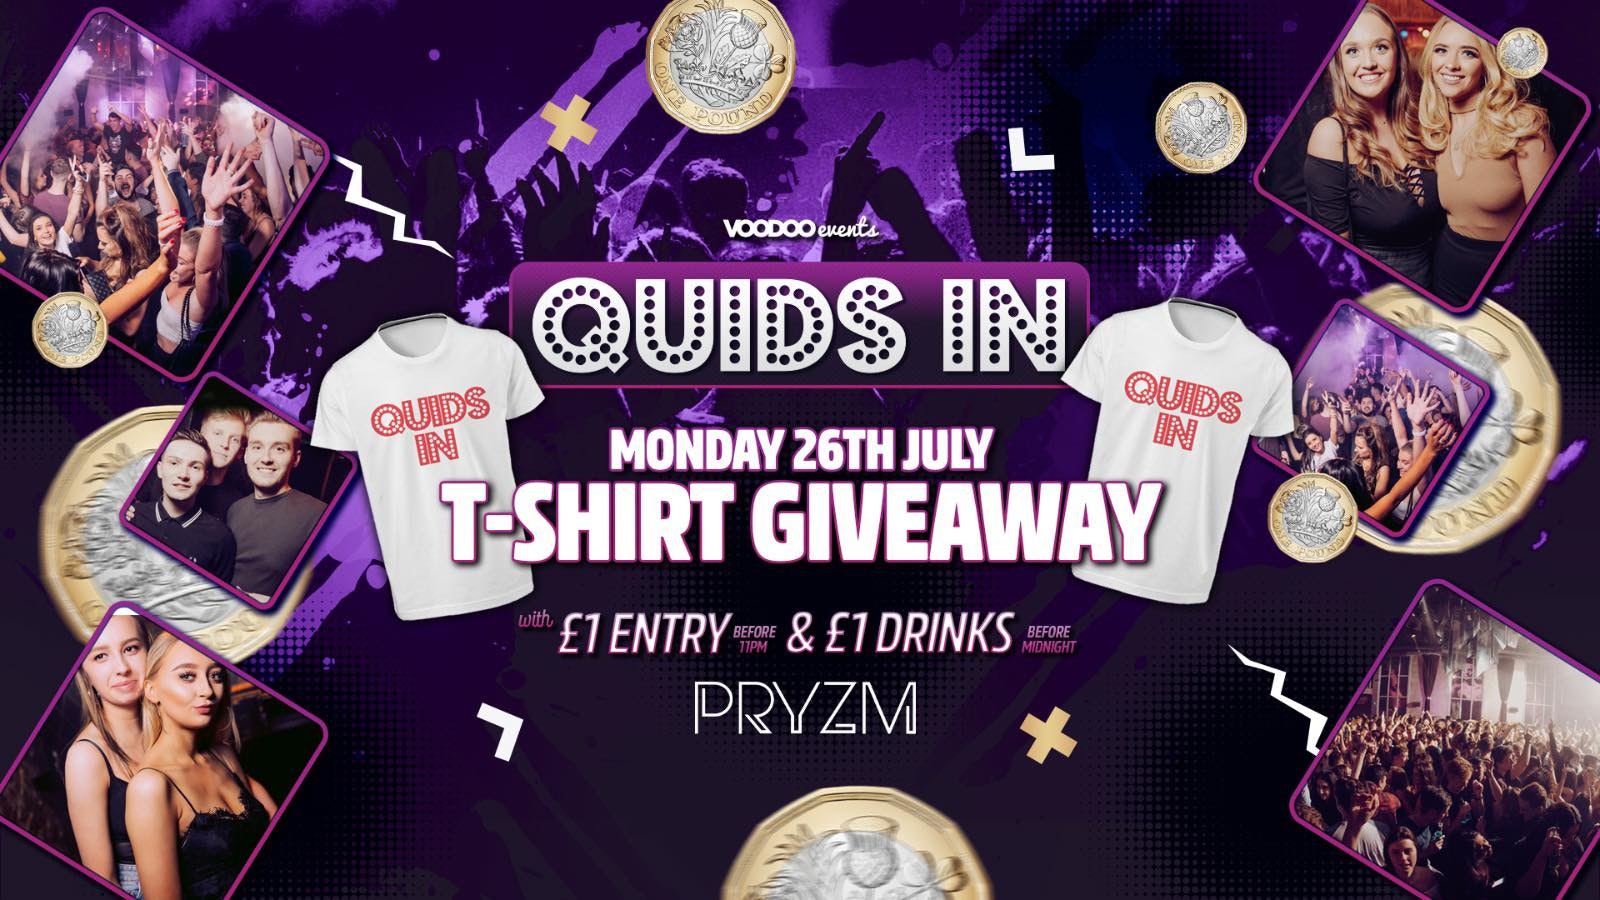 Quids In Mondays at PRYZM – 26th July T Shirt Giveaway!